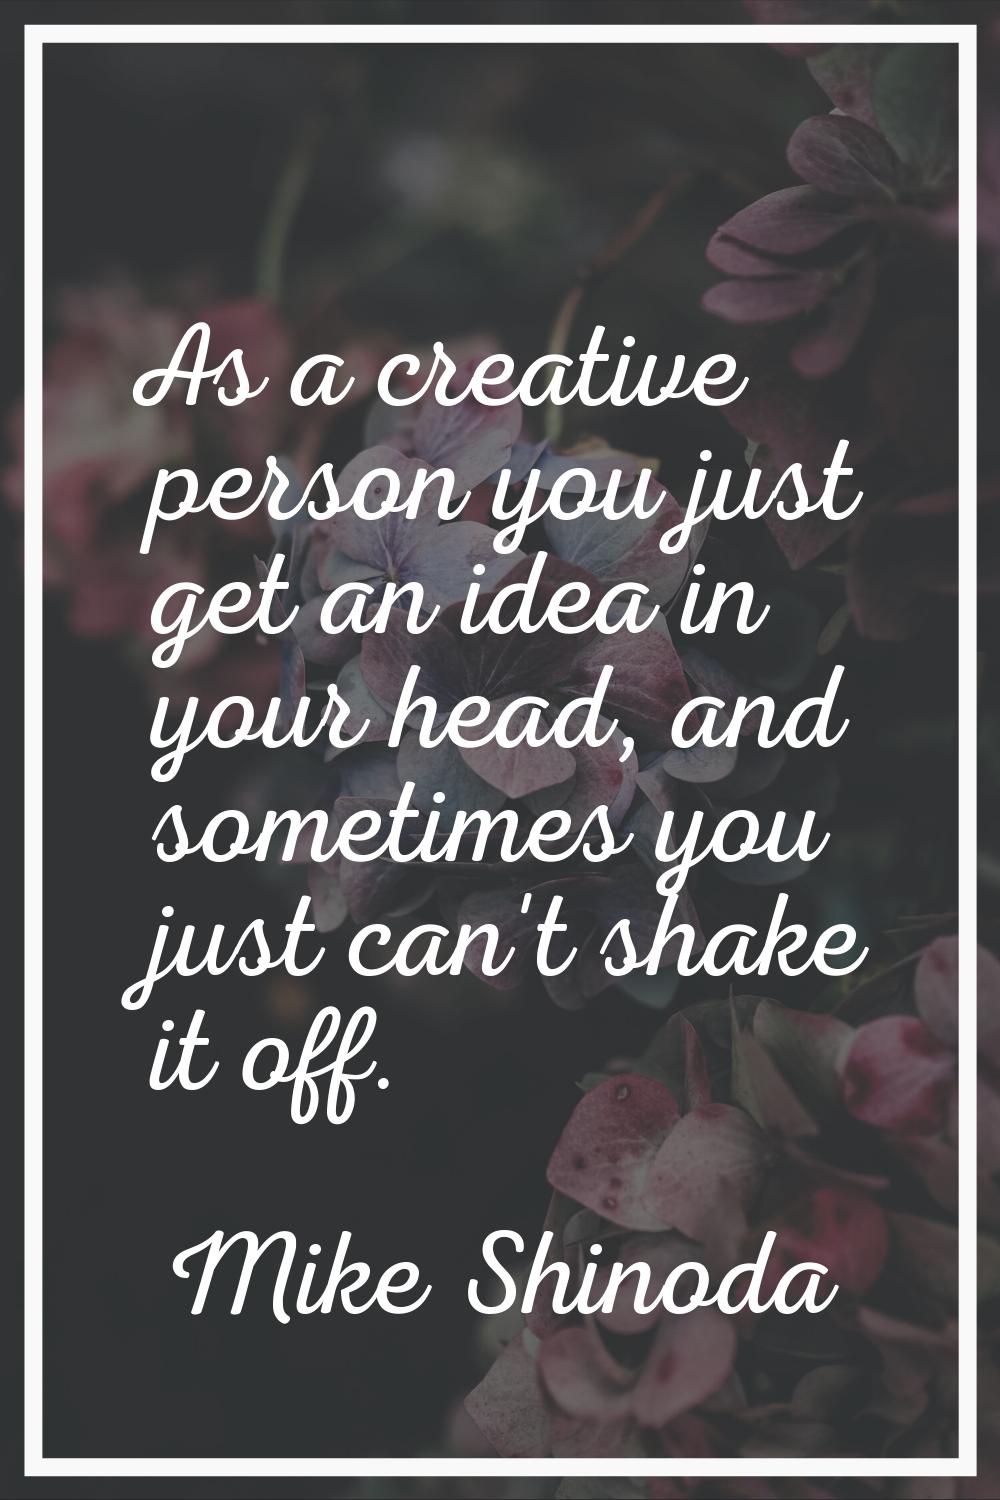 As a creative person you just get an idea in your head, and sometimes you just can't shake it off.